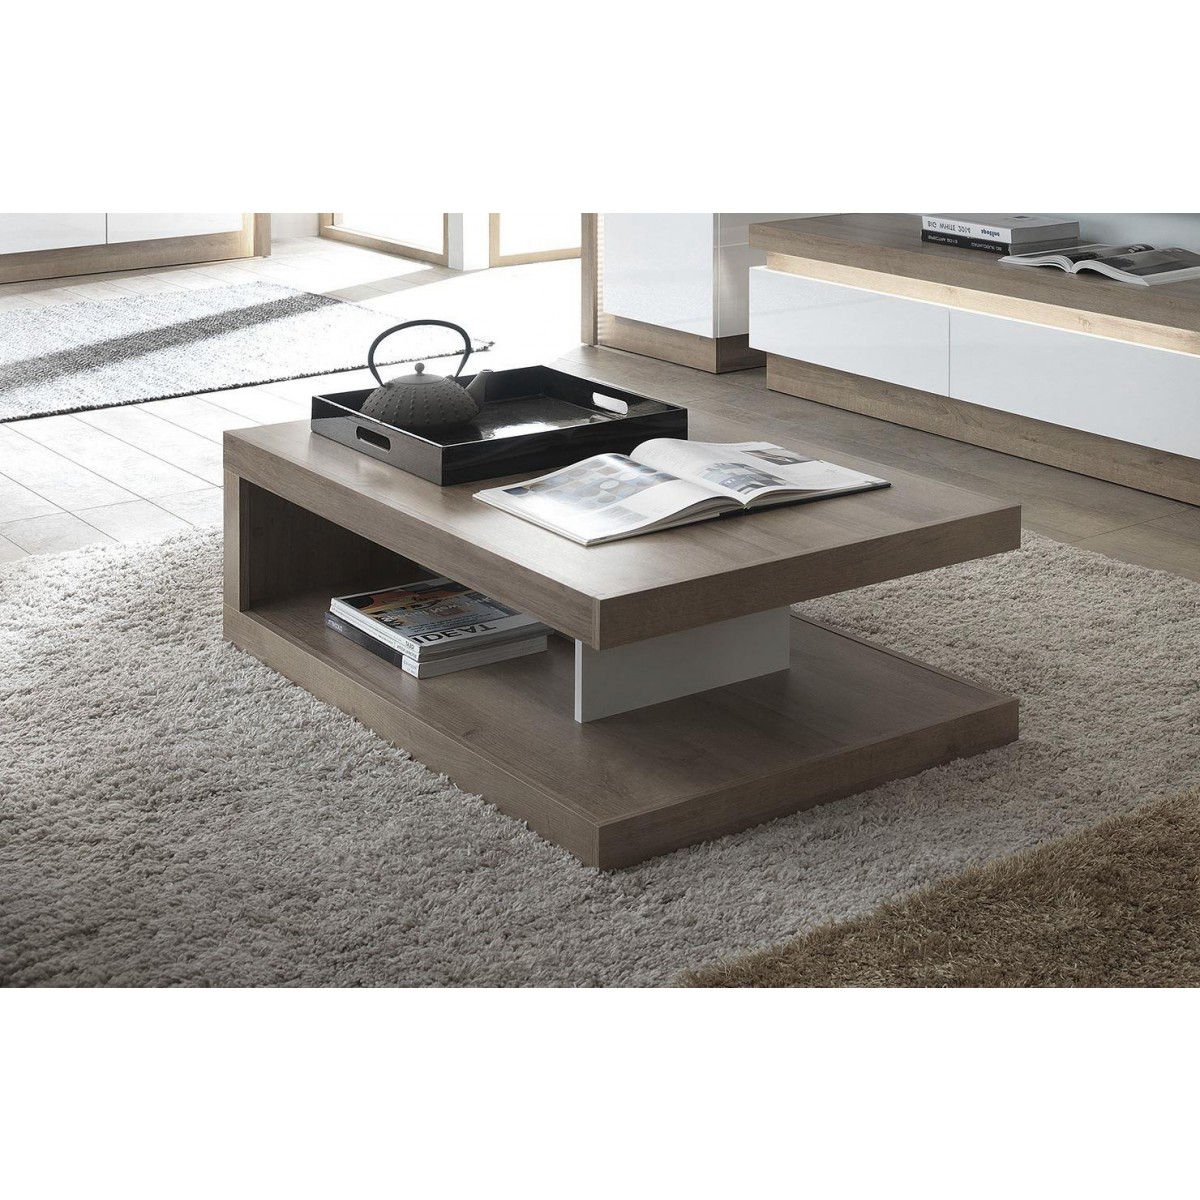 Modern Home Augustus Designer Coffee Table On Wheels In Riviera Oak White High Gloss Free Next Day Delivery